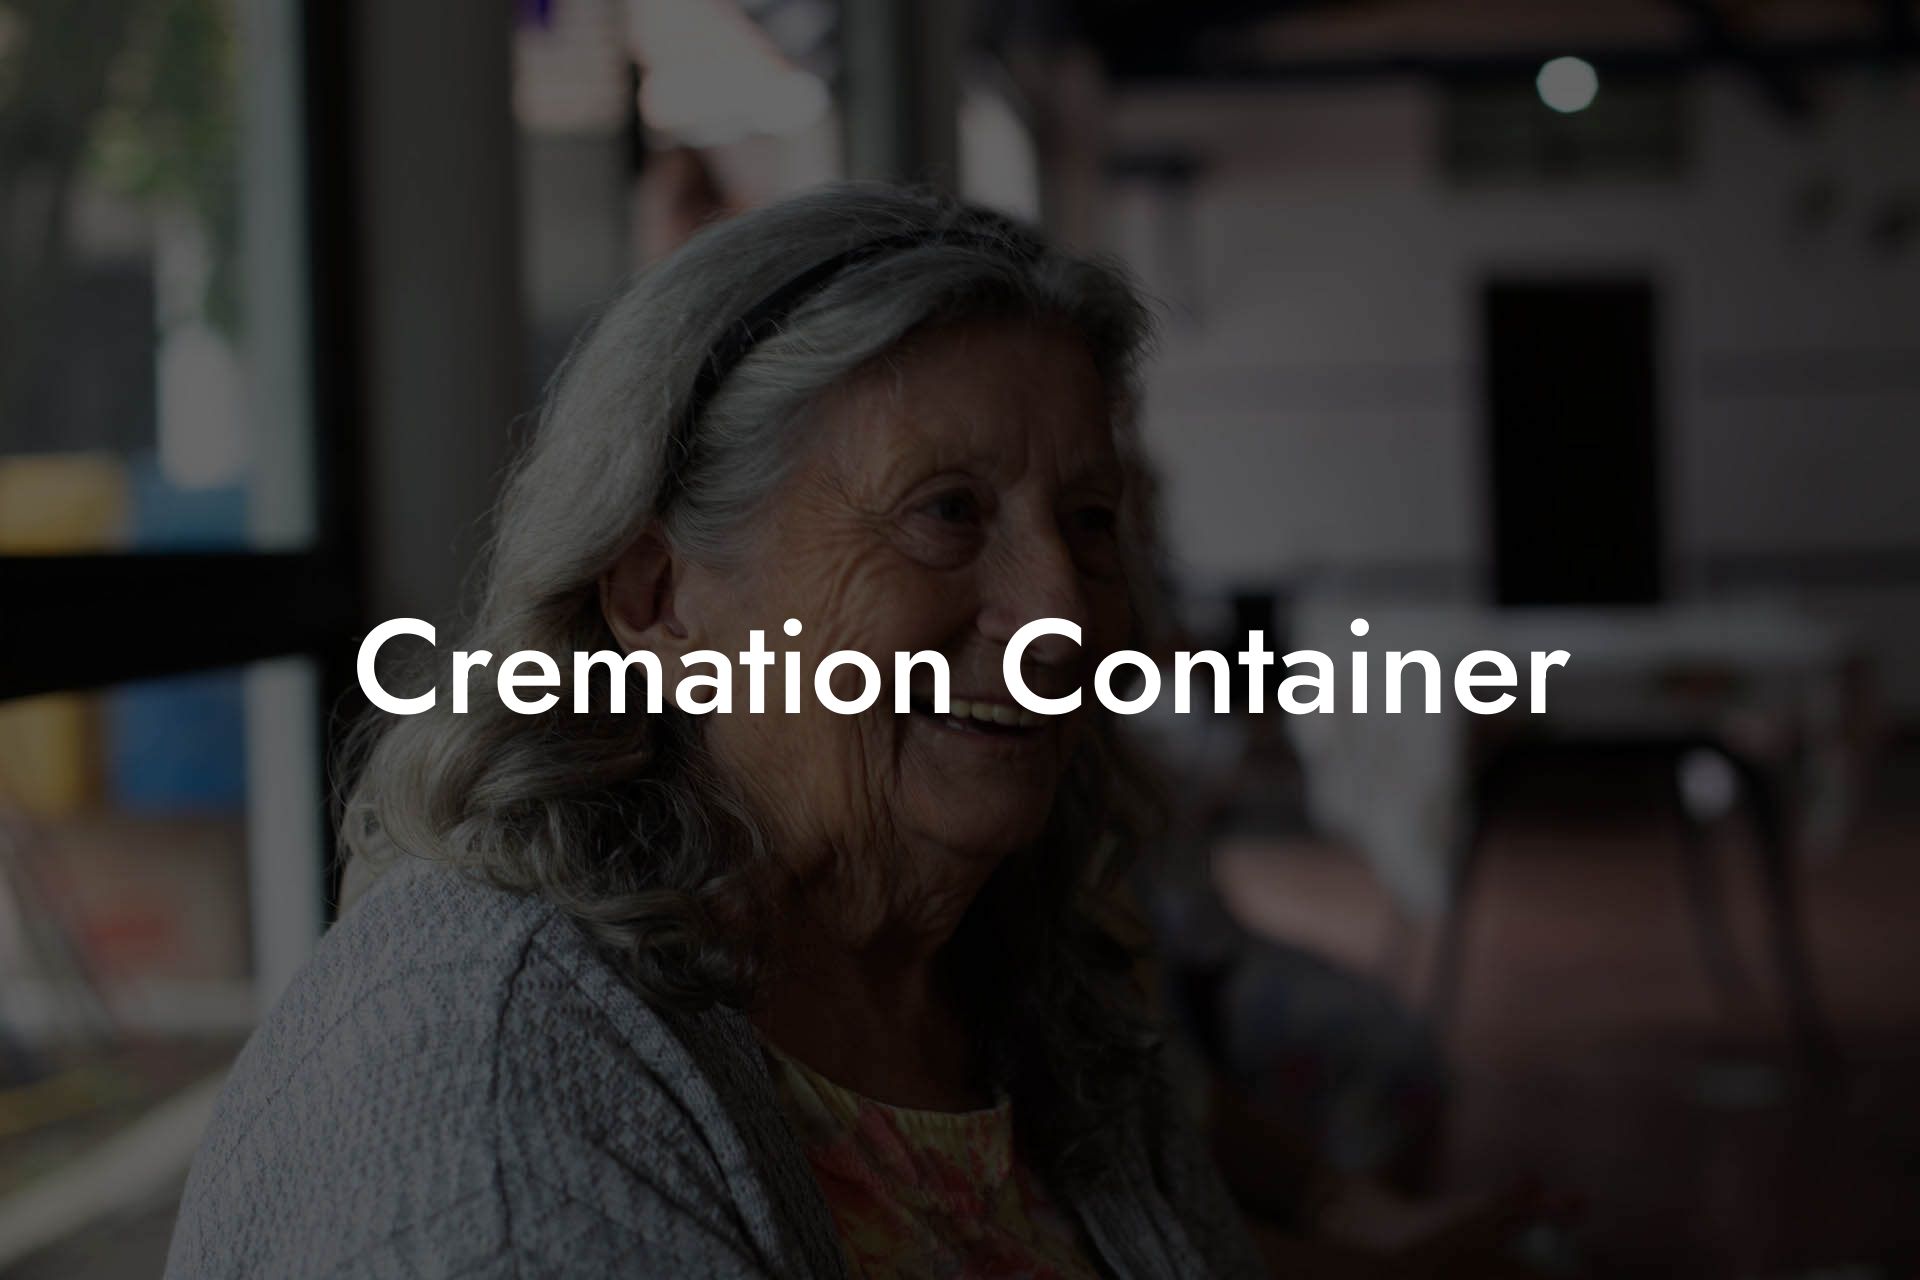 Cremation Container